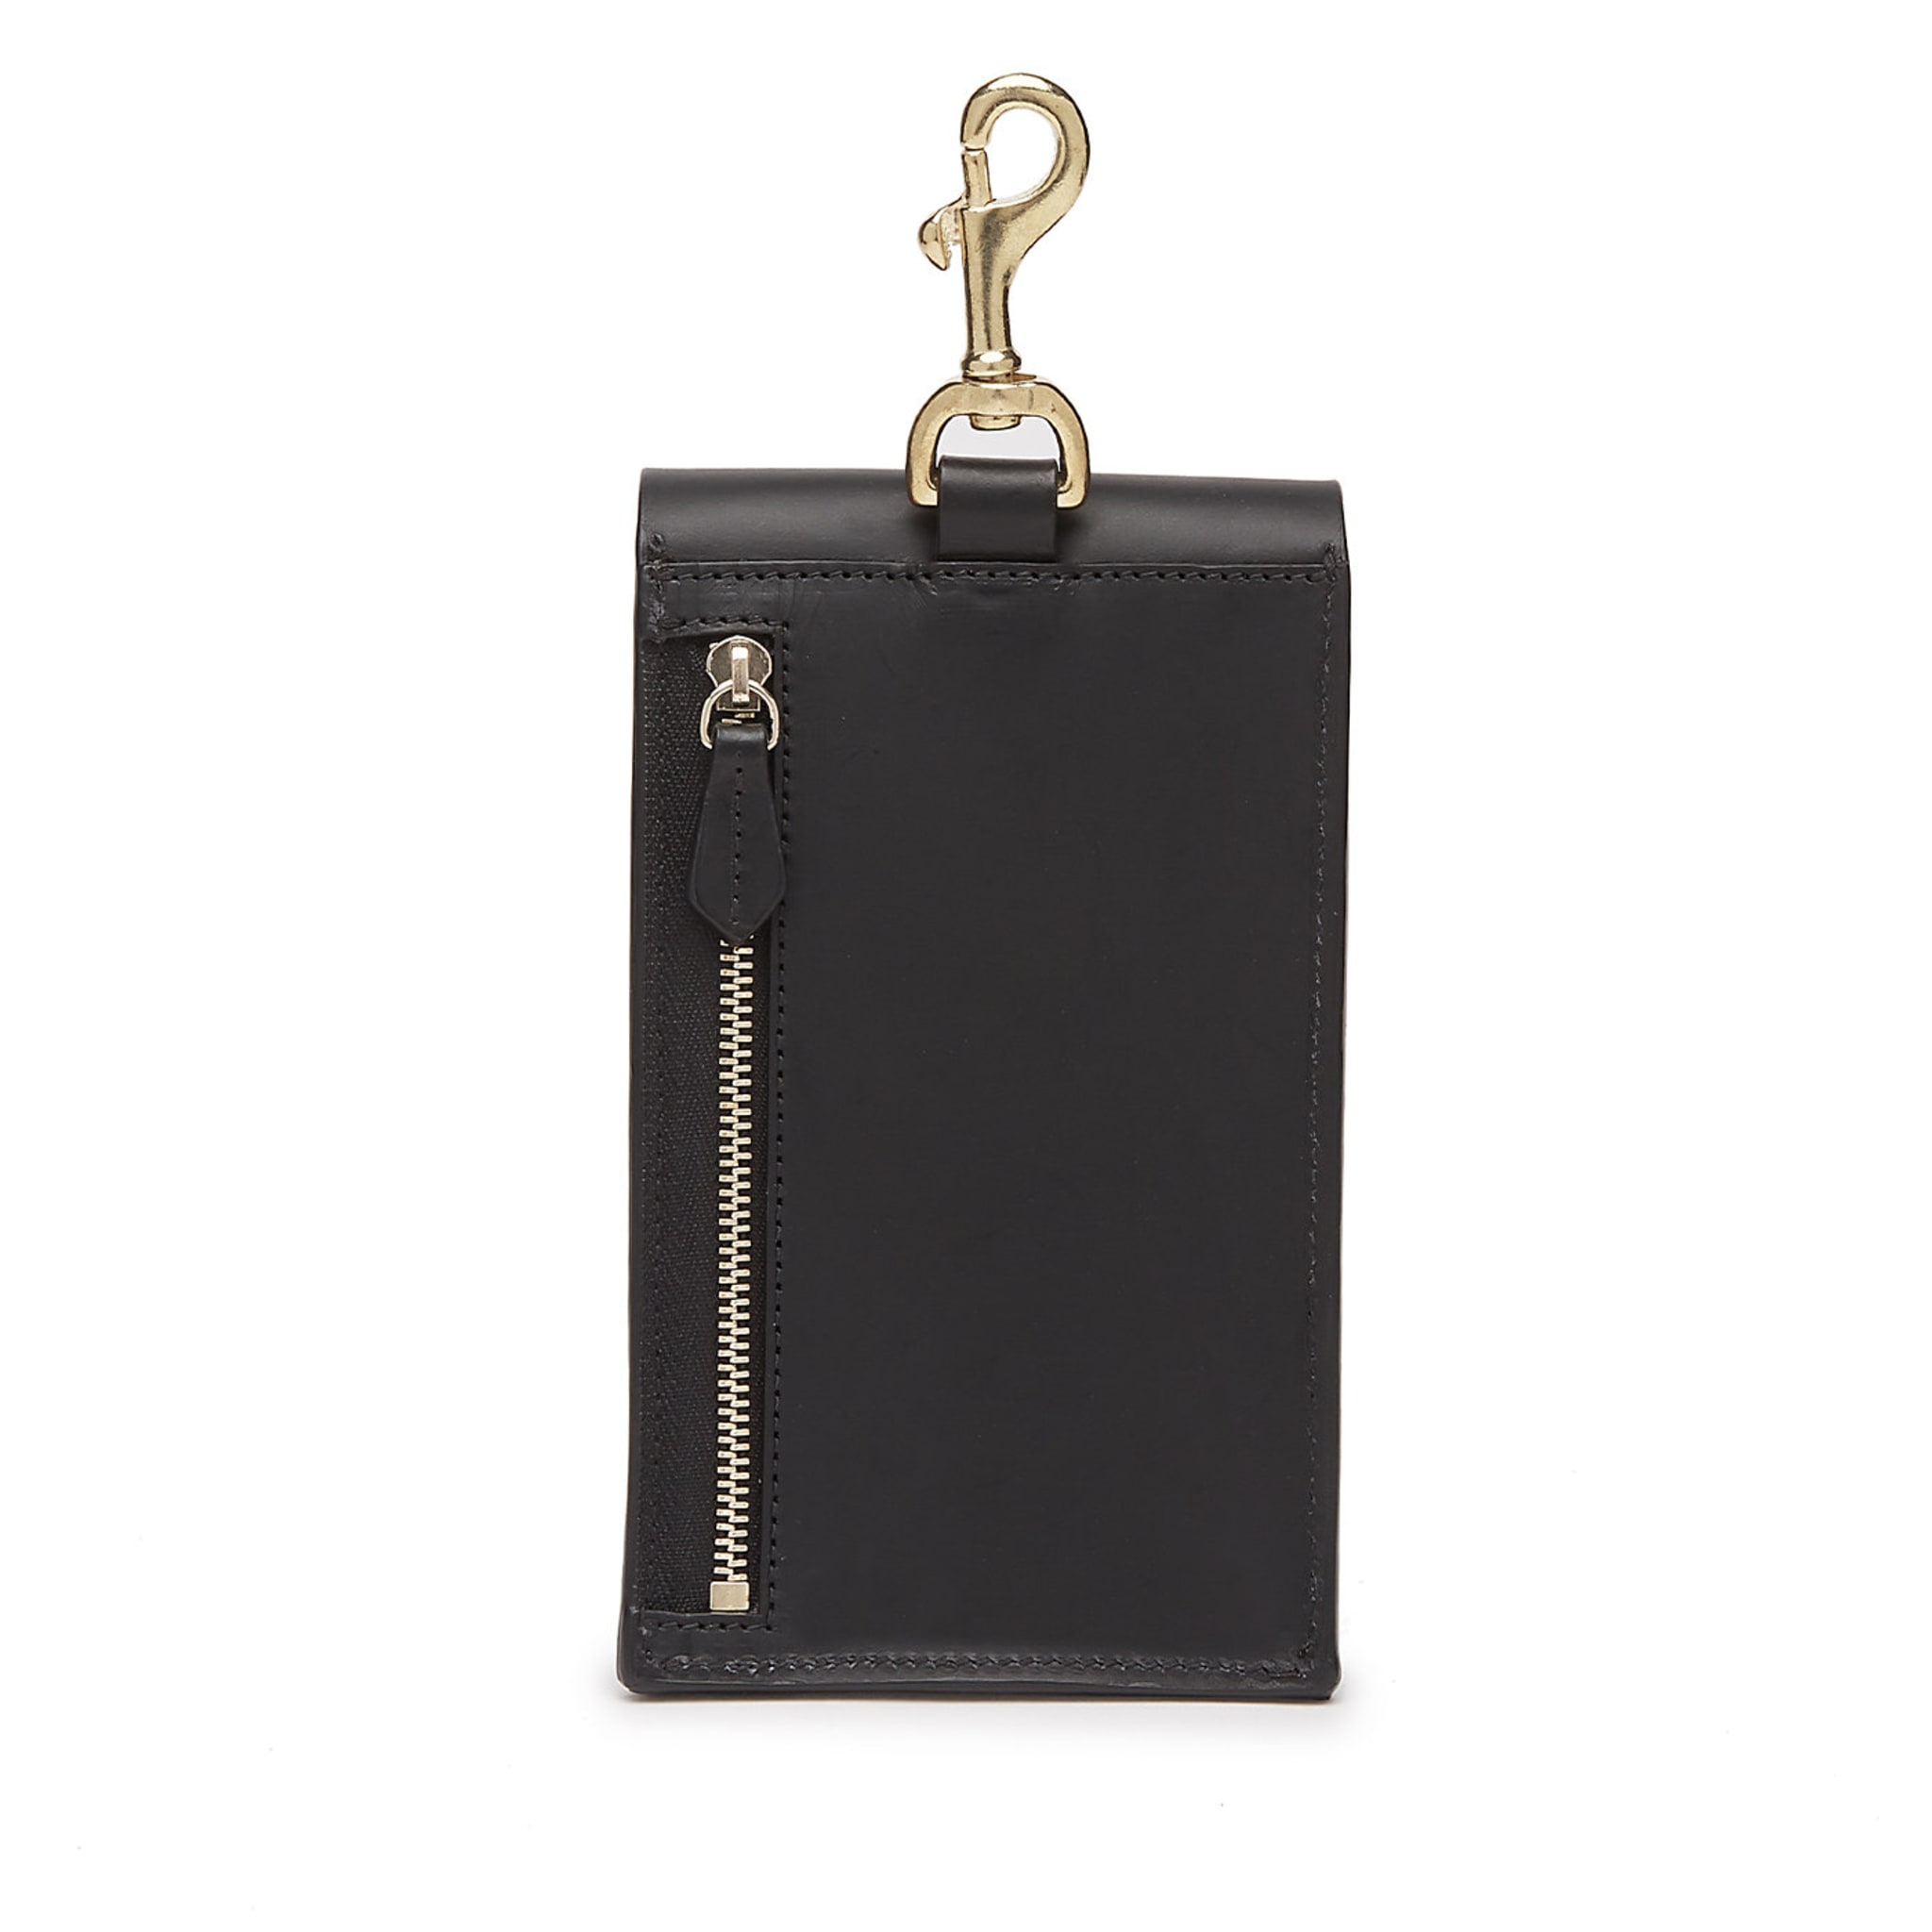 Black Leather Phone Pouch - Alternative view 1